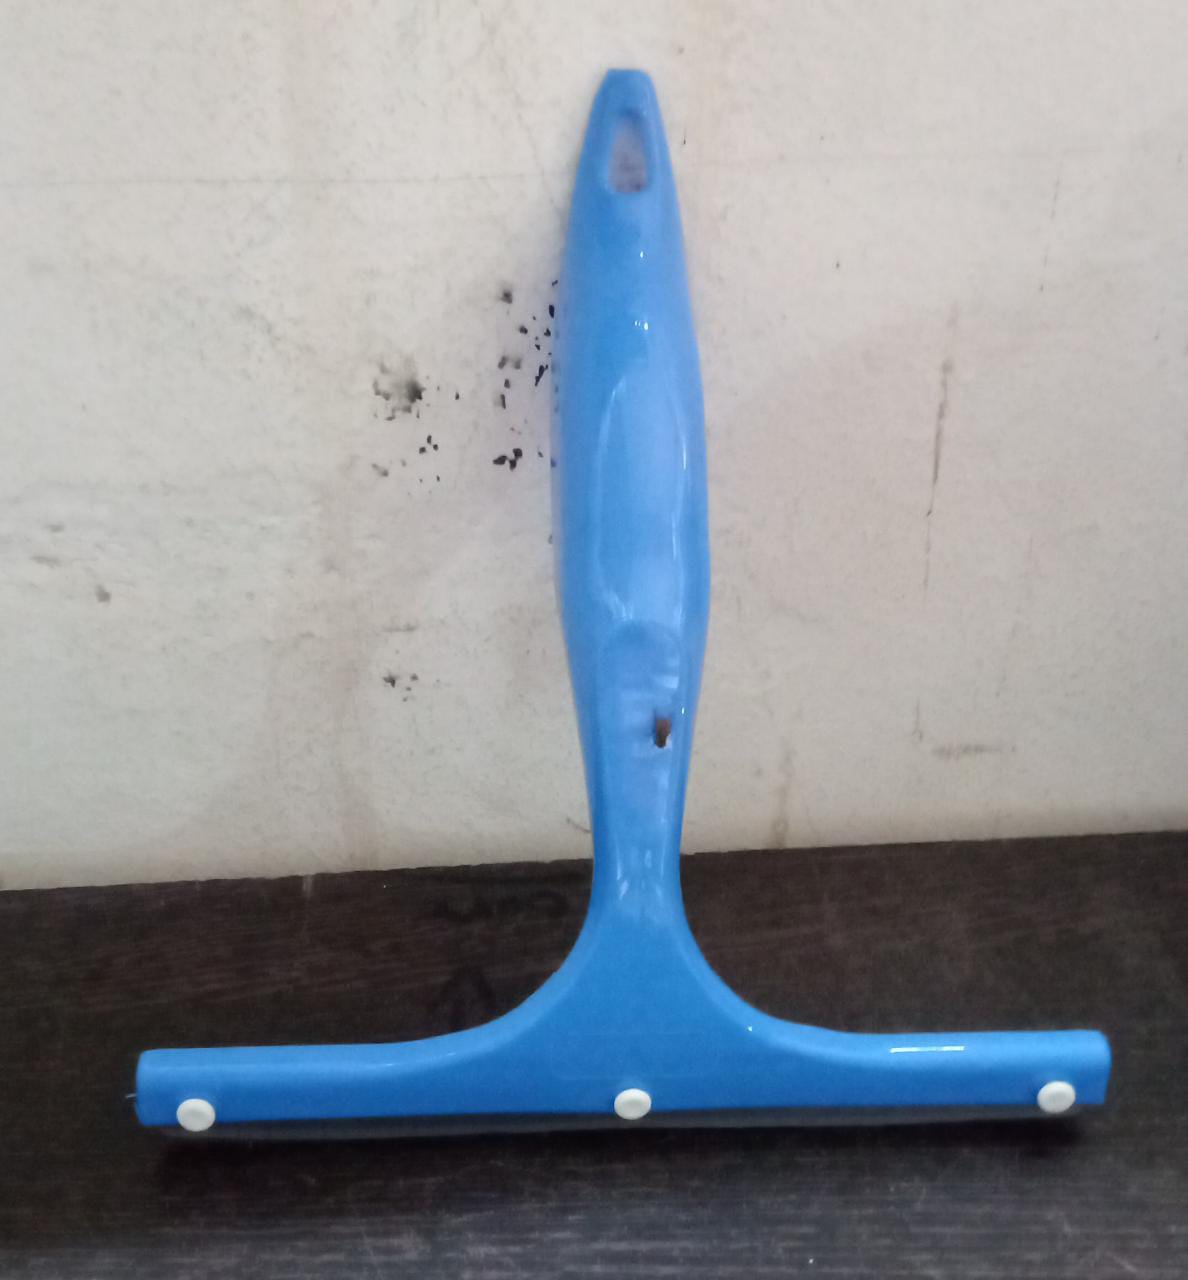 Car Mirror Wiper used for all kinds of cars and vehicles for